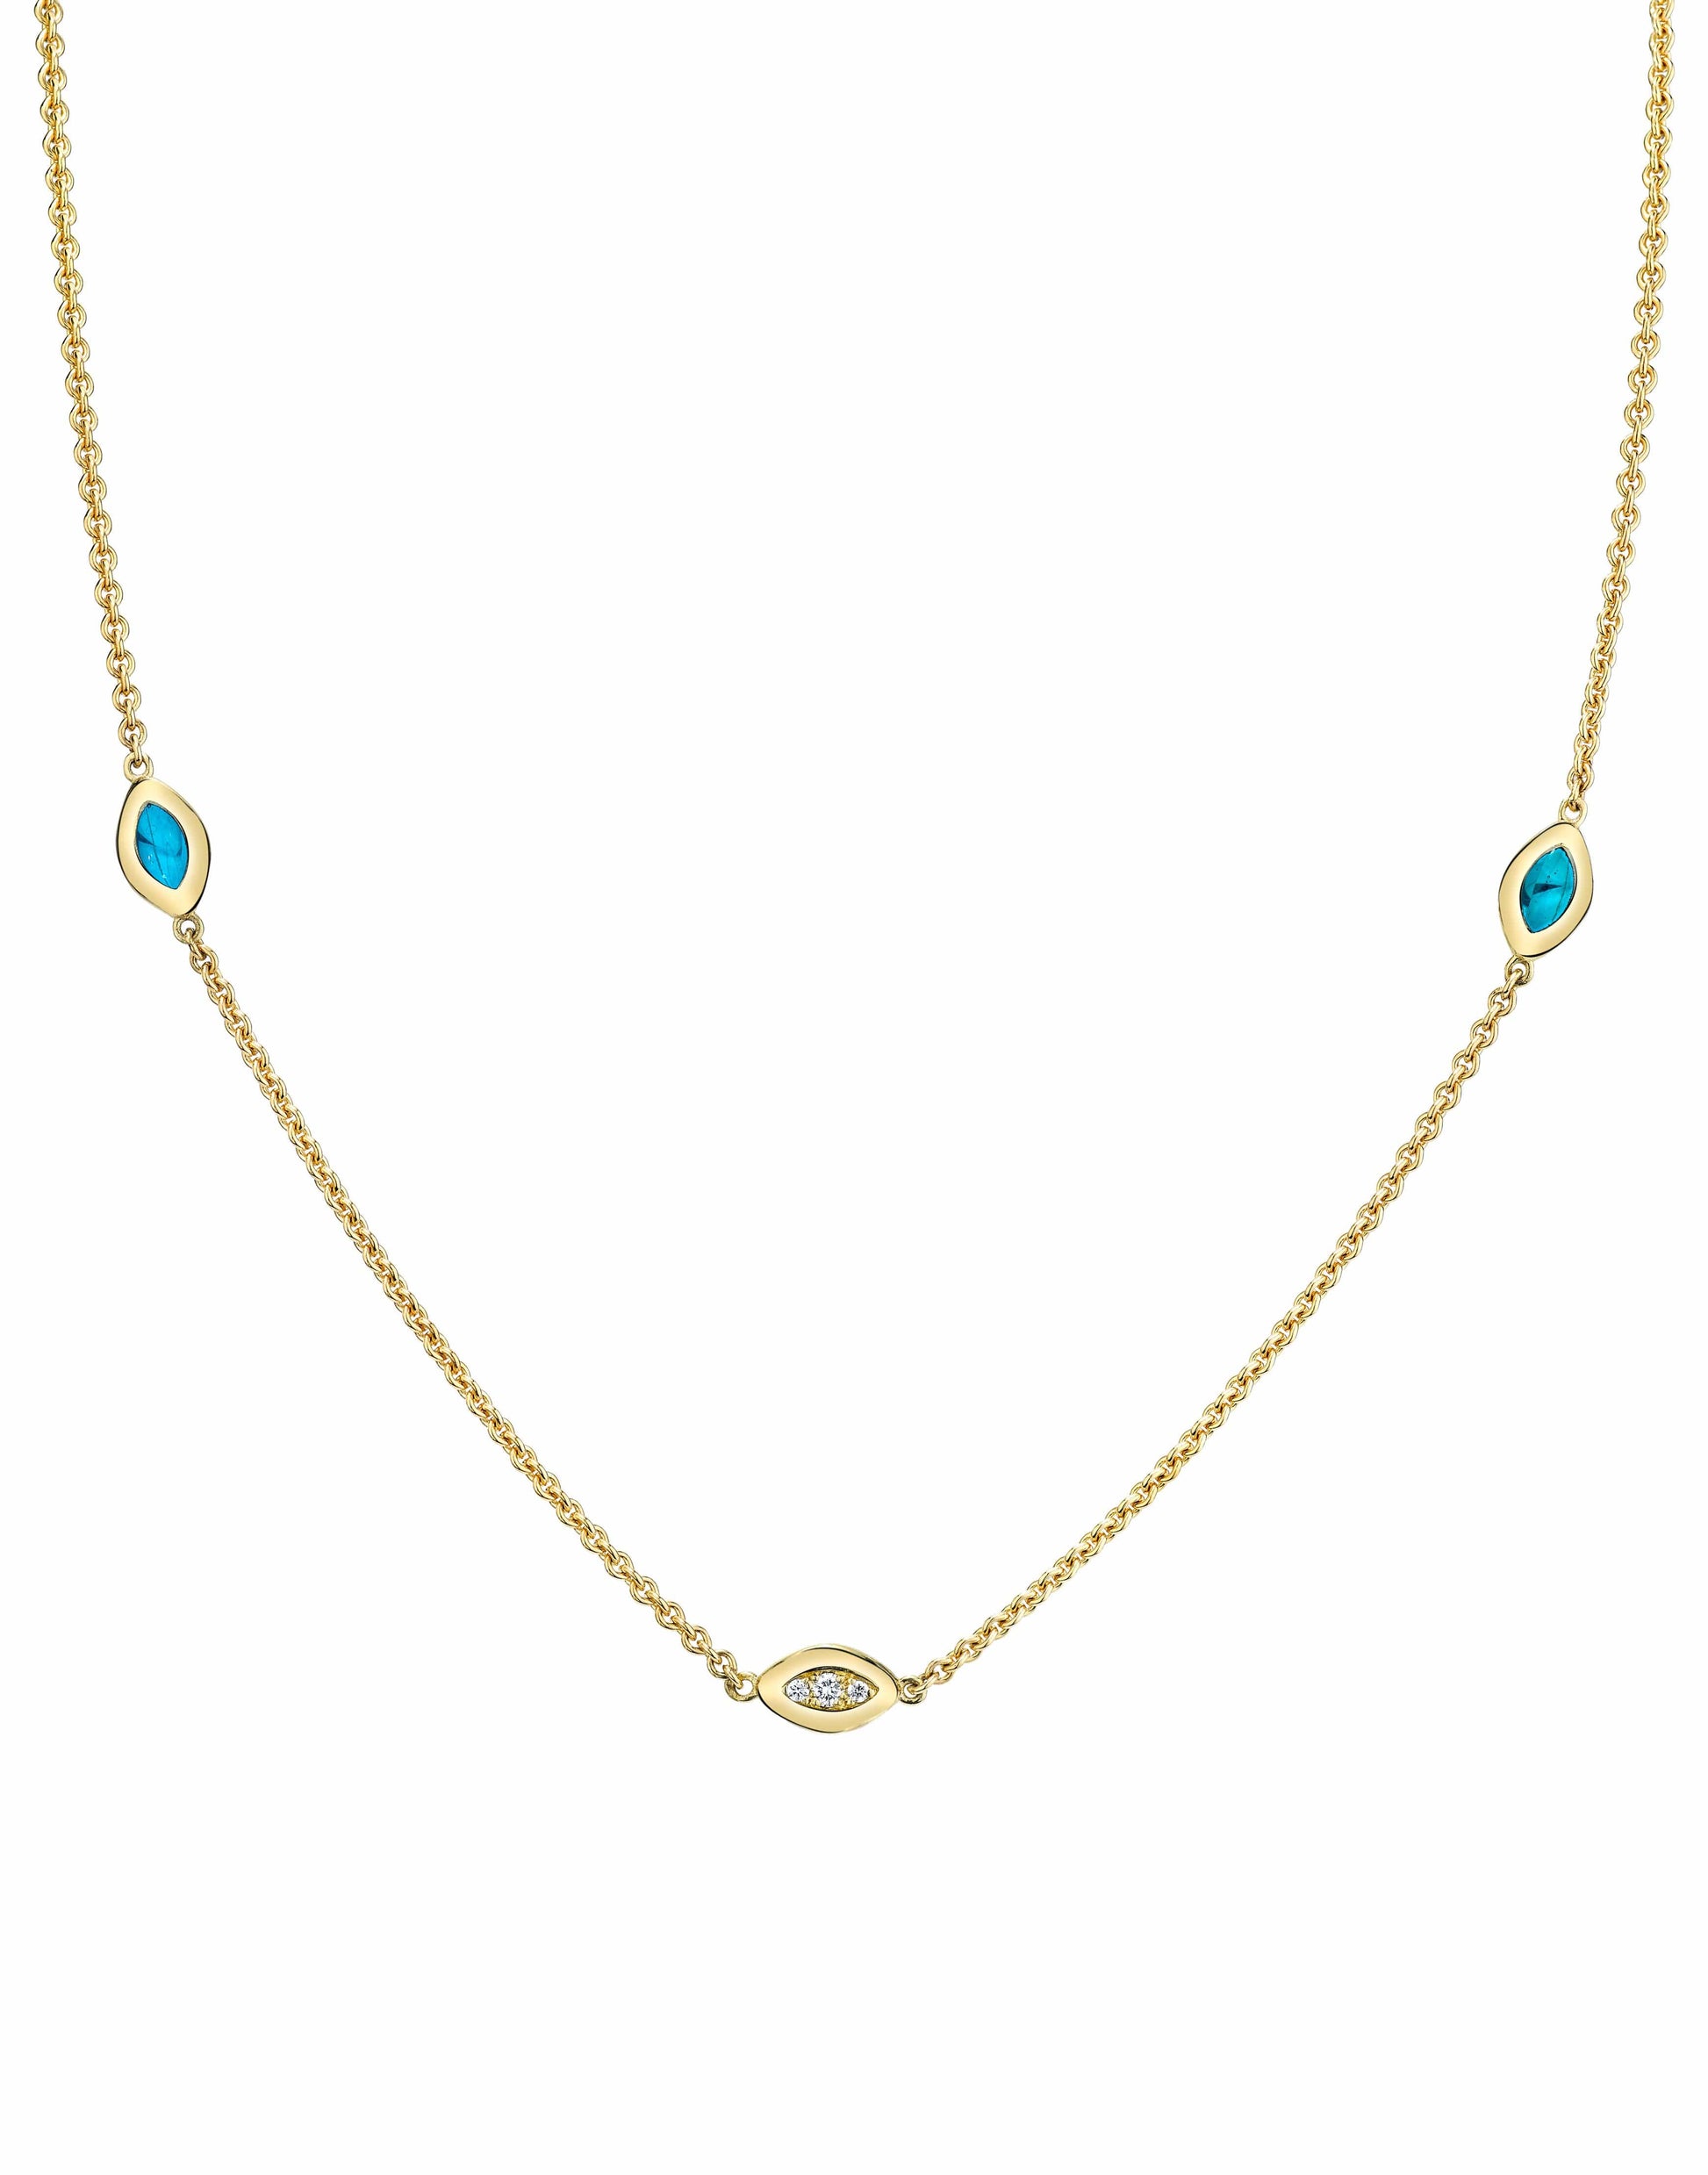 ANDY LIF-Cats Eye Link Necklace Blue Enamel and Diamonds-YELLOW GOLD